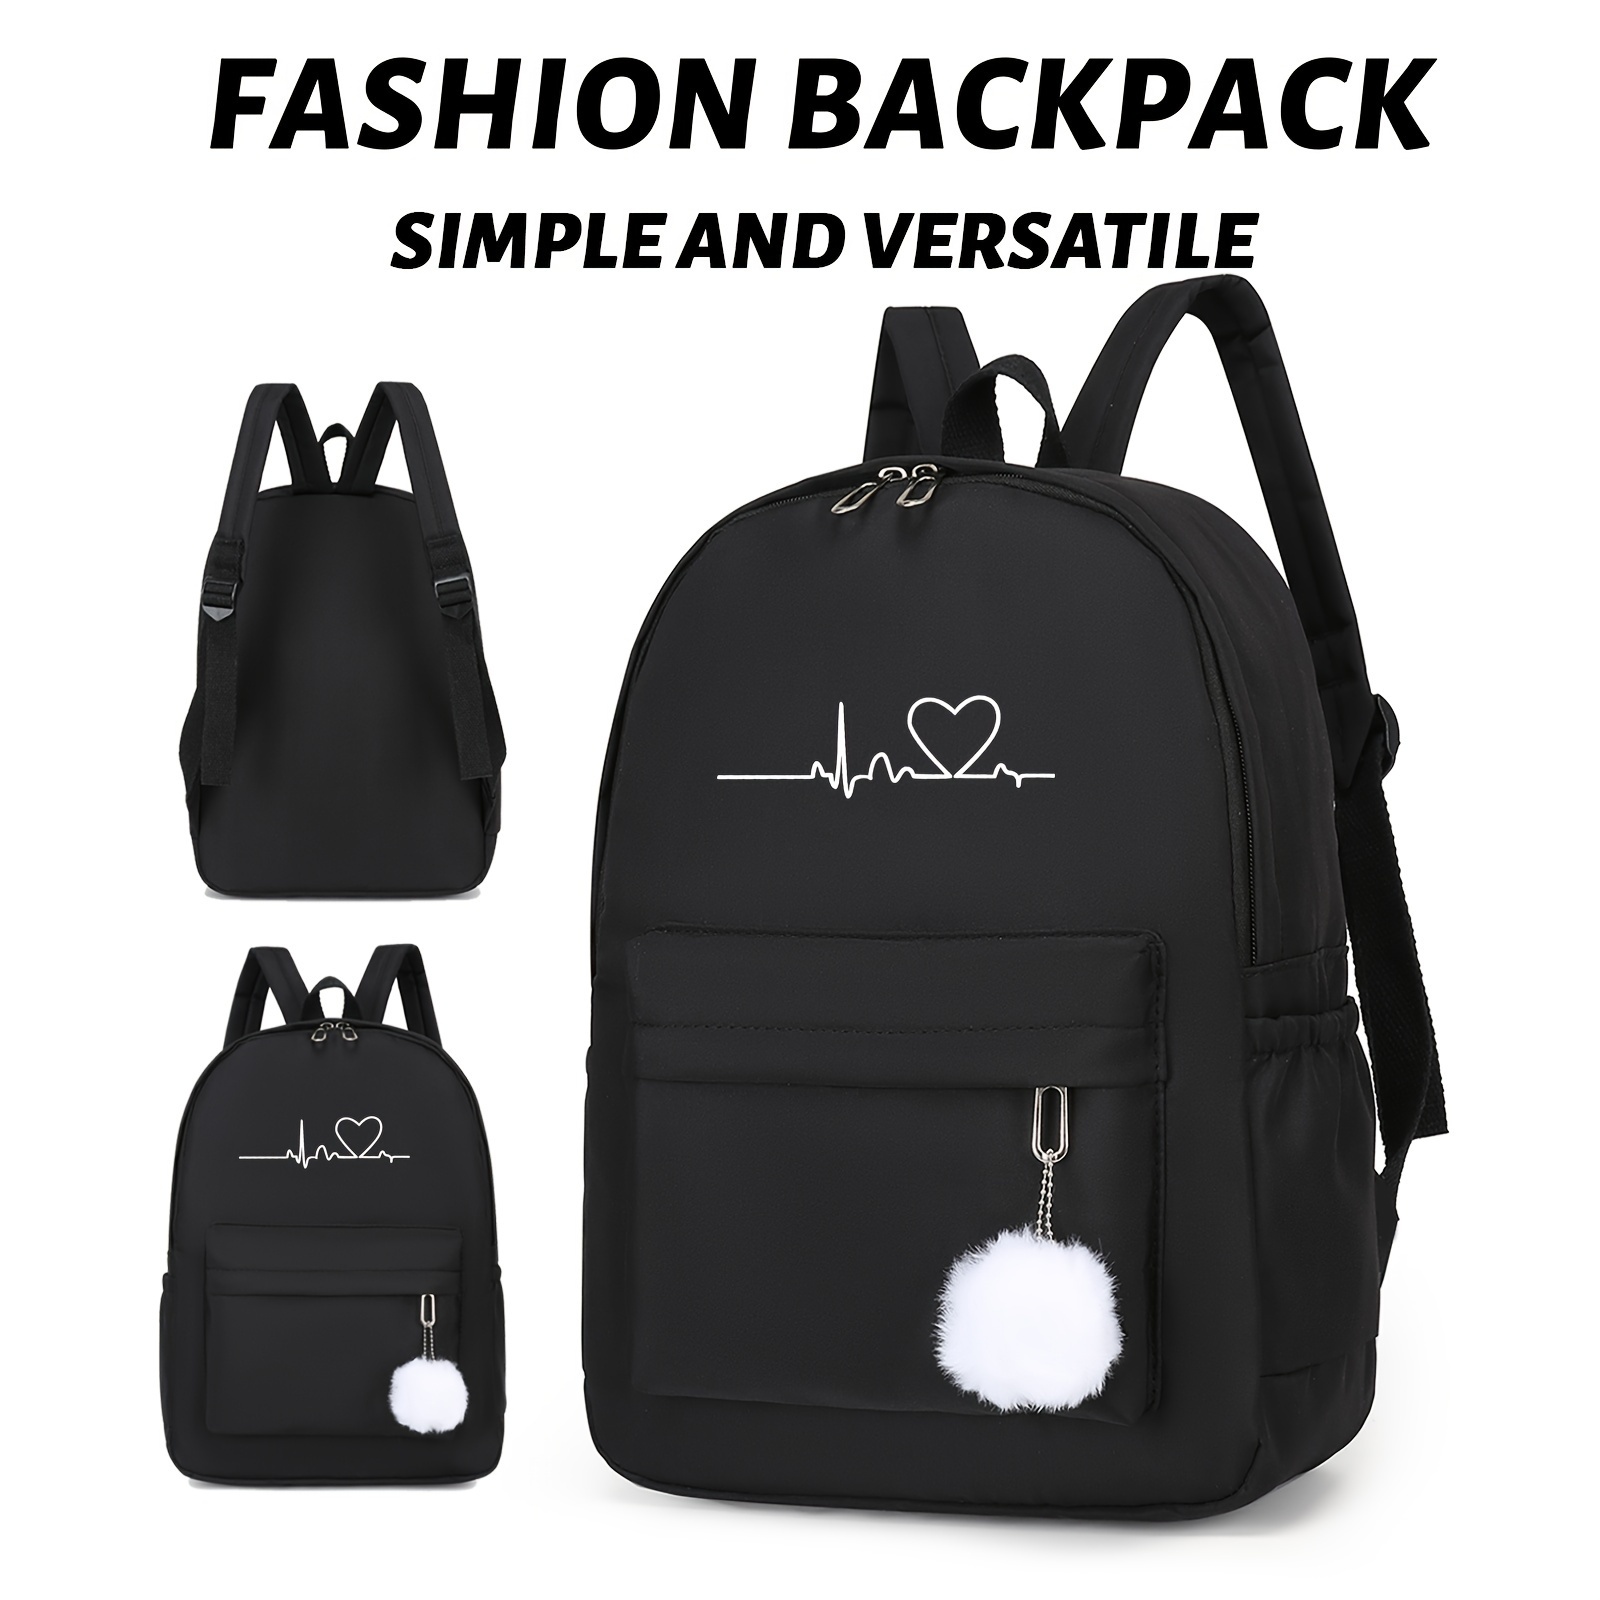 

Fashionable Black Backpack With Heartbeat Design - Perfect For Travel And Everyday Use